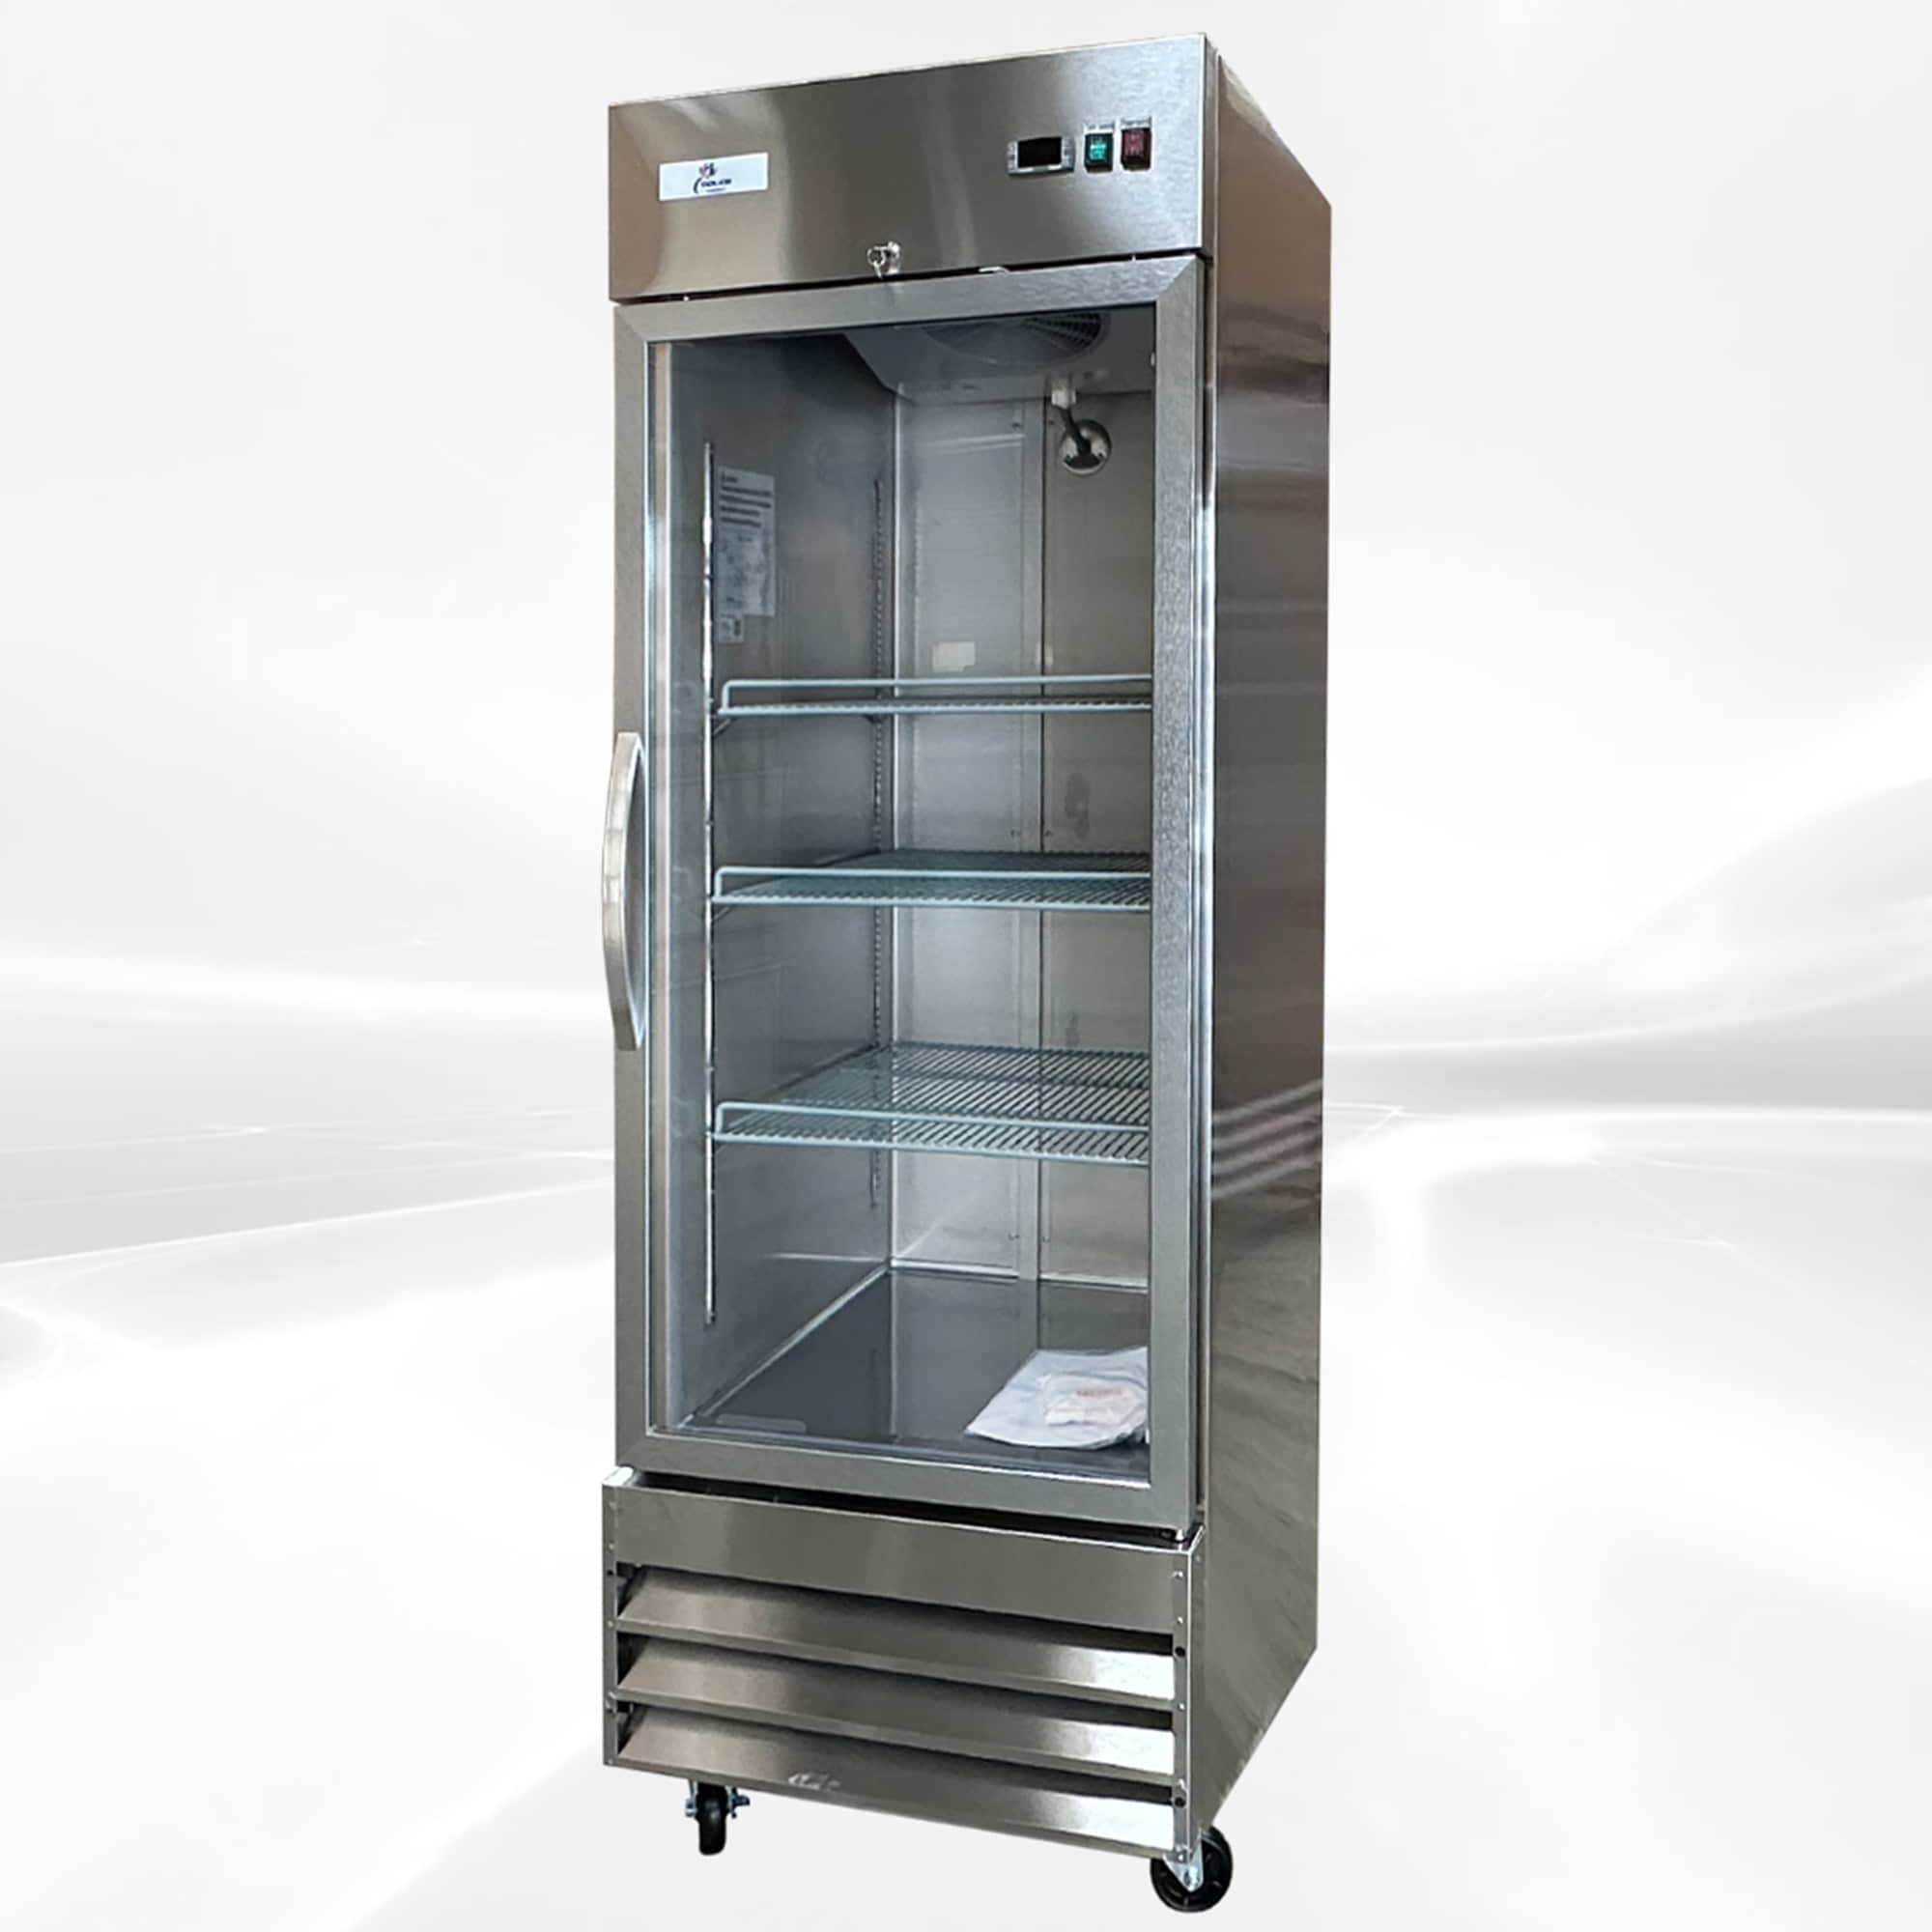 KoolMore 47 Cu. Ft. Commercial Stainless-Steel Upright Reach-In Freezer  with Self-Close Glass Doors in Silver.